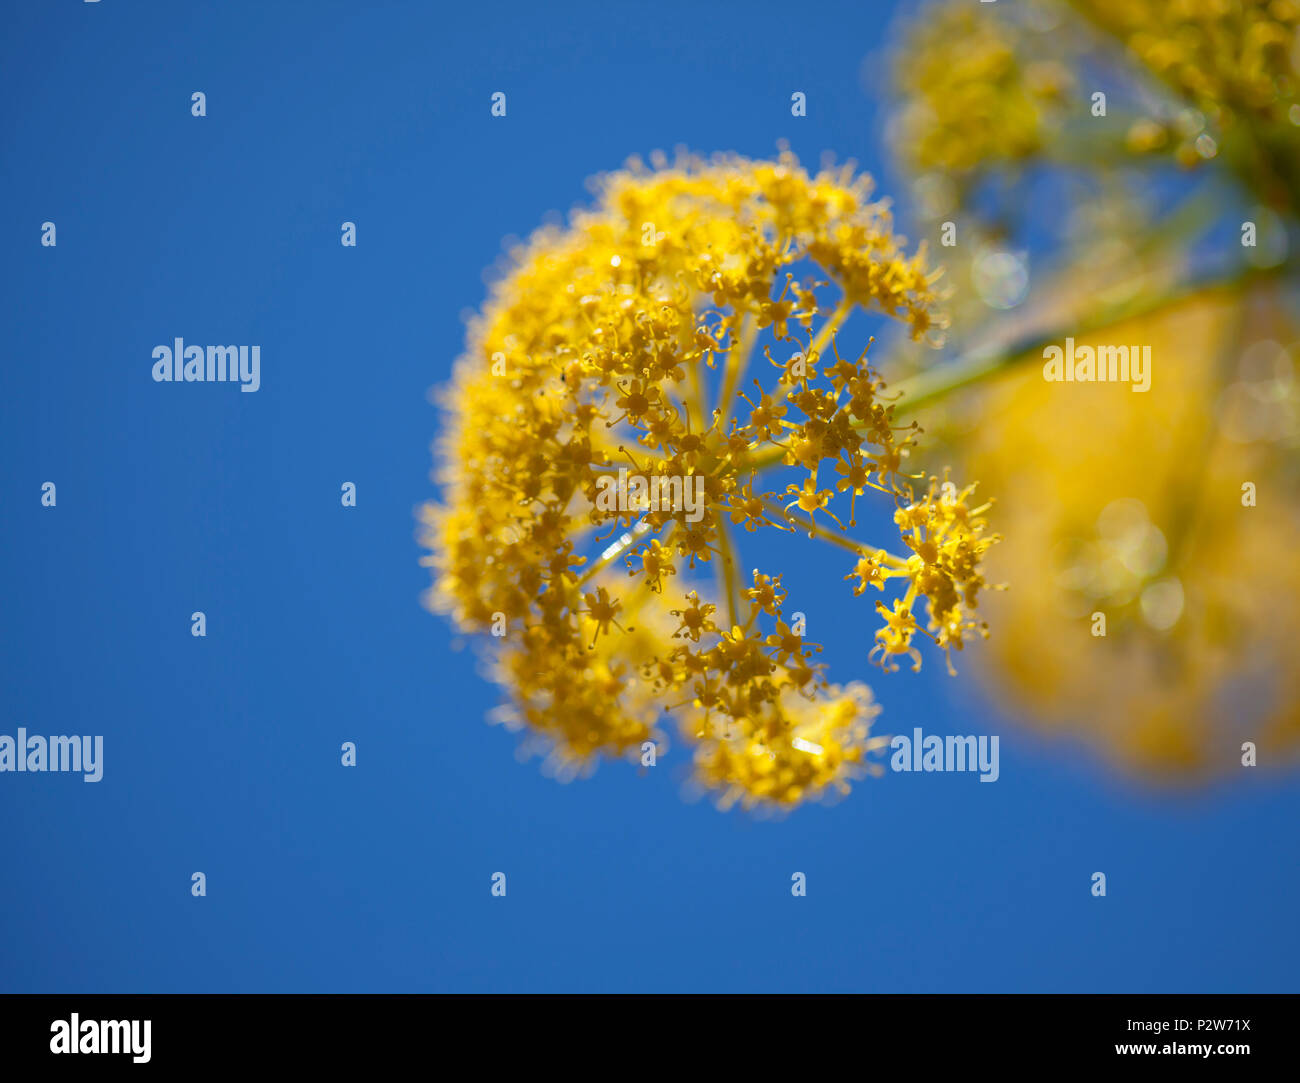 Flora of Gran Canaria - Ferula linkii, Giant Canary Fennel flowers close up Stock Photo